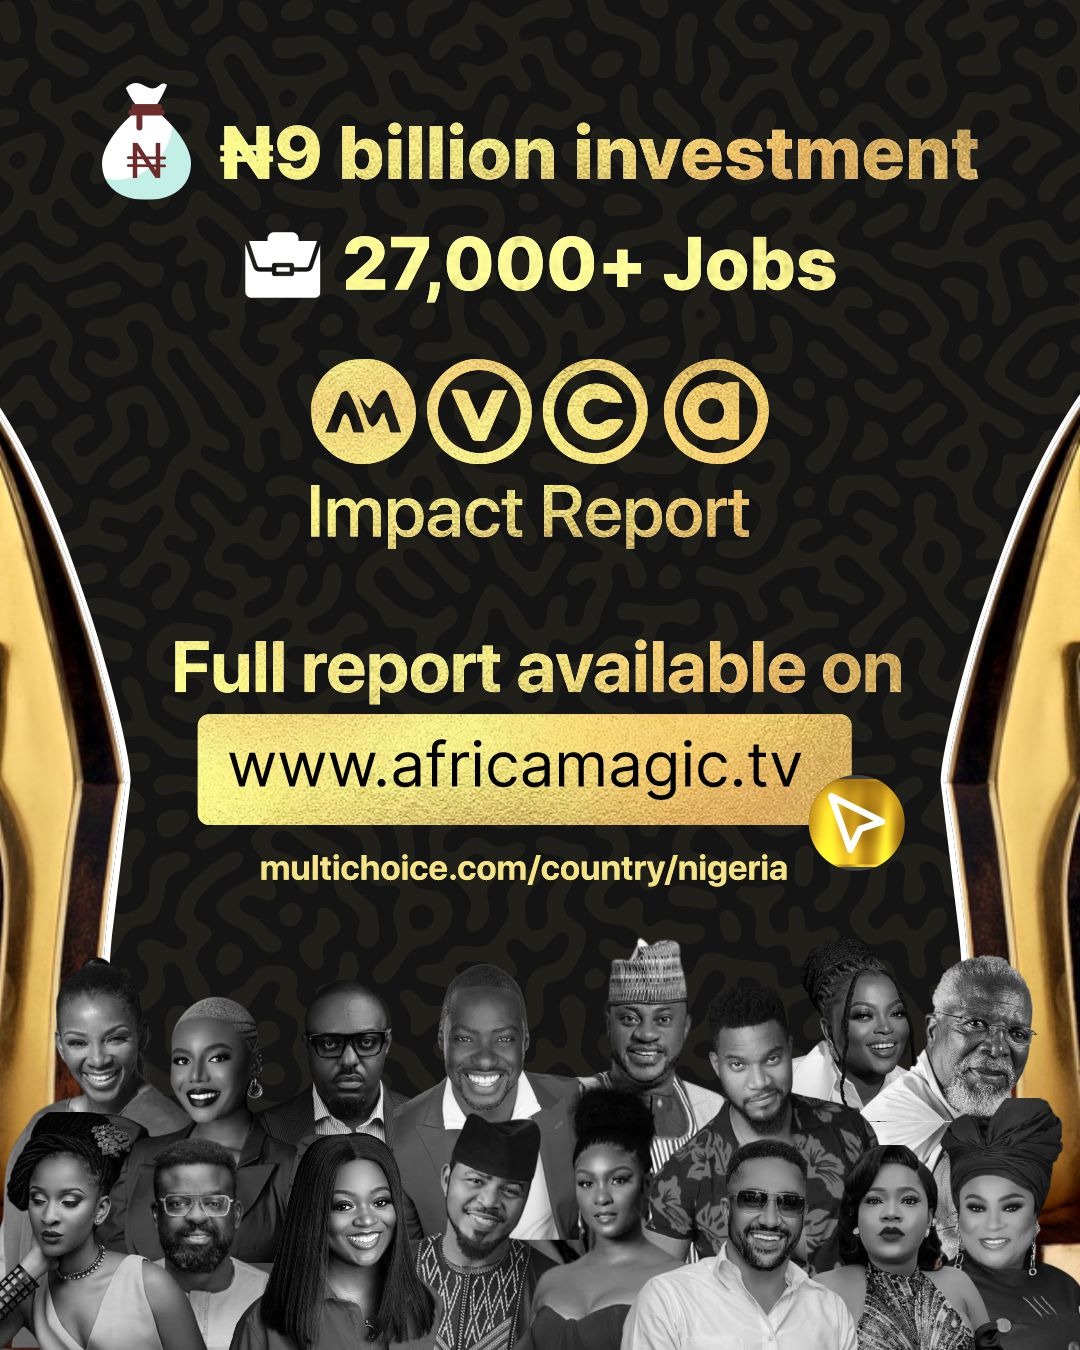 Fact 1 - Multichoice Reveals N9Billion Investment in AMVCA and Awards Impact Report On Film/TV Sector